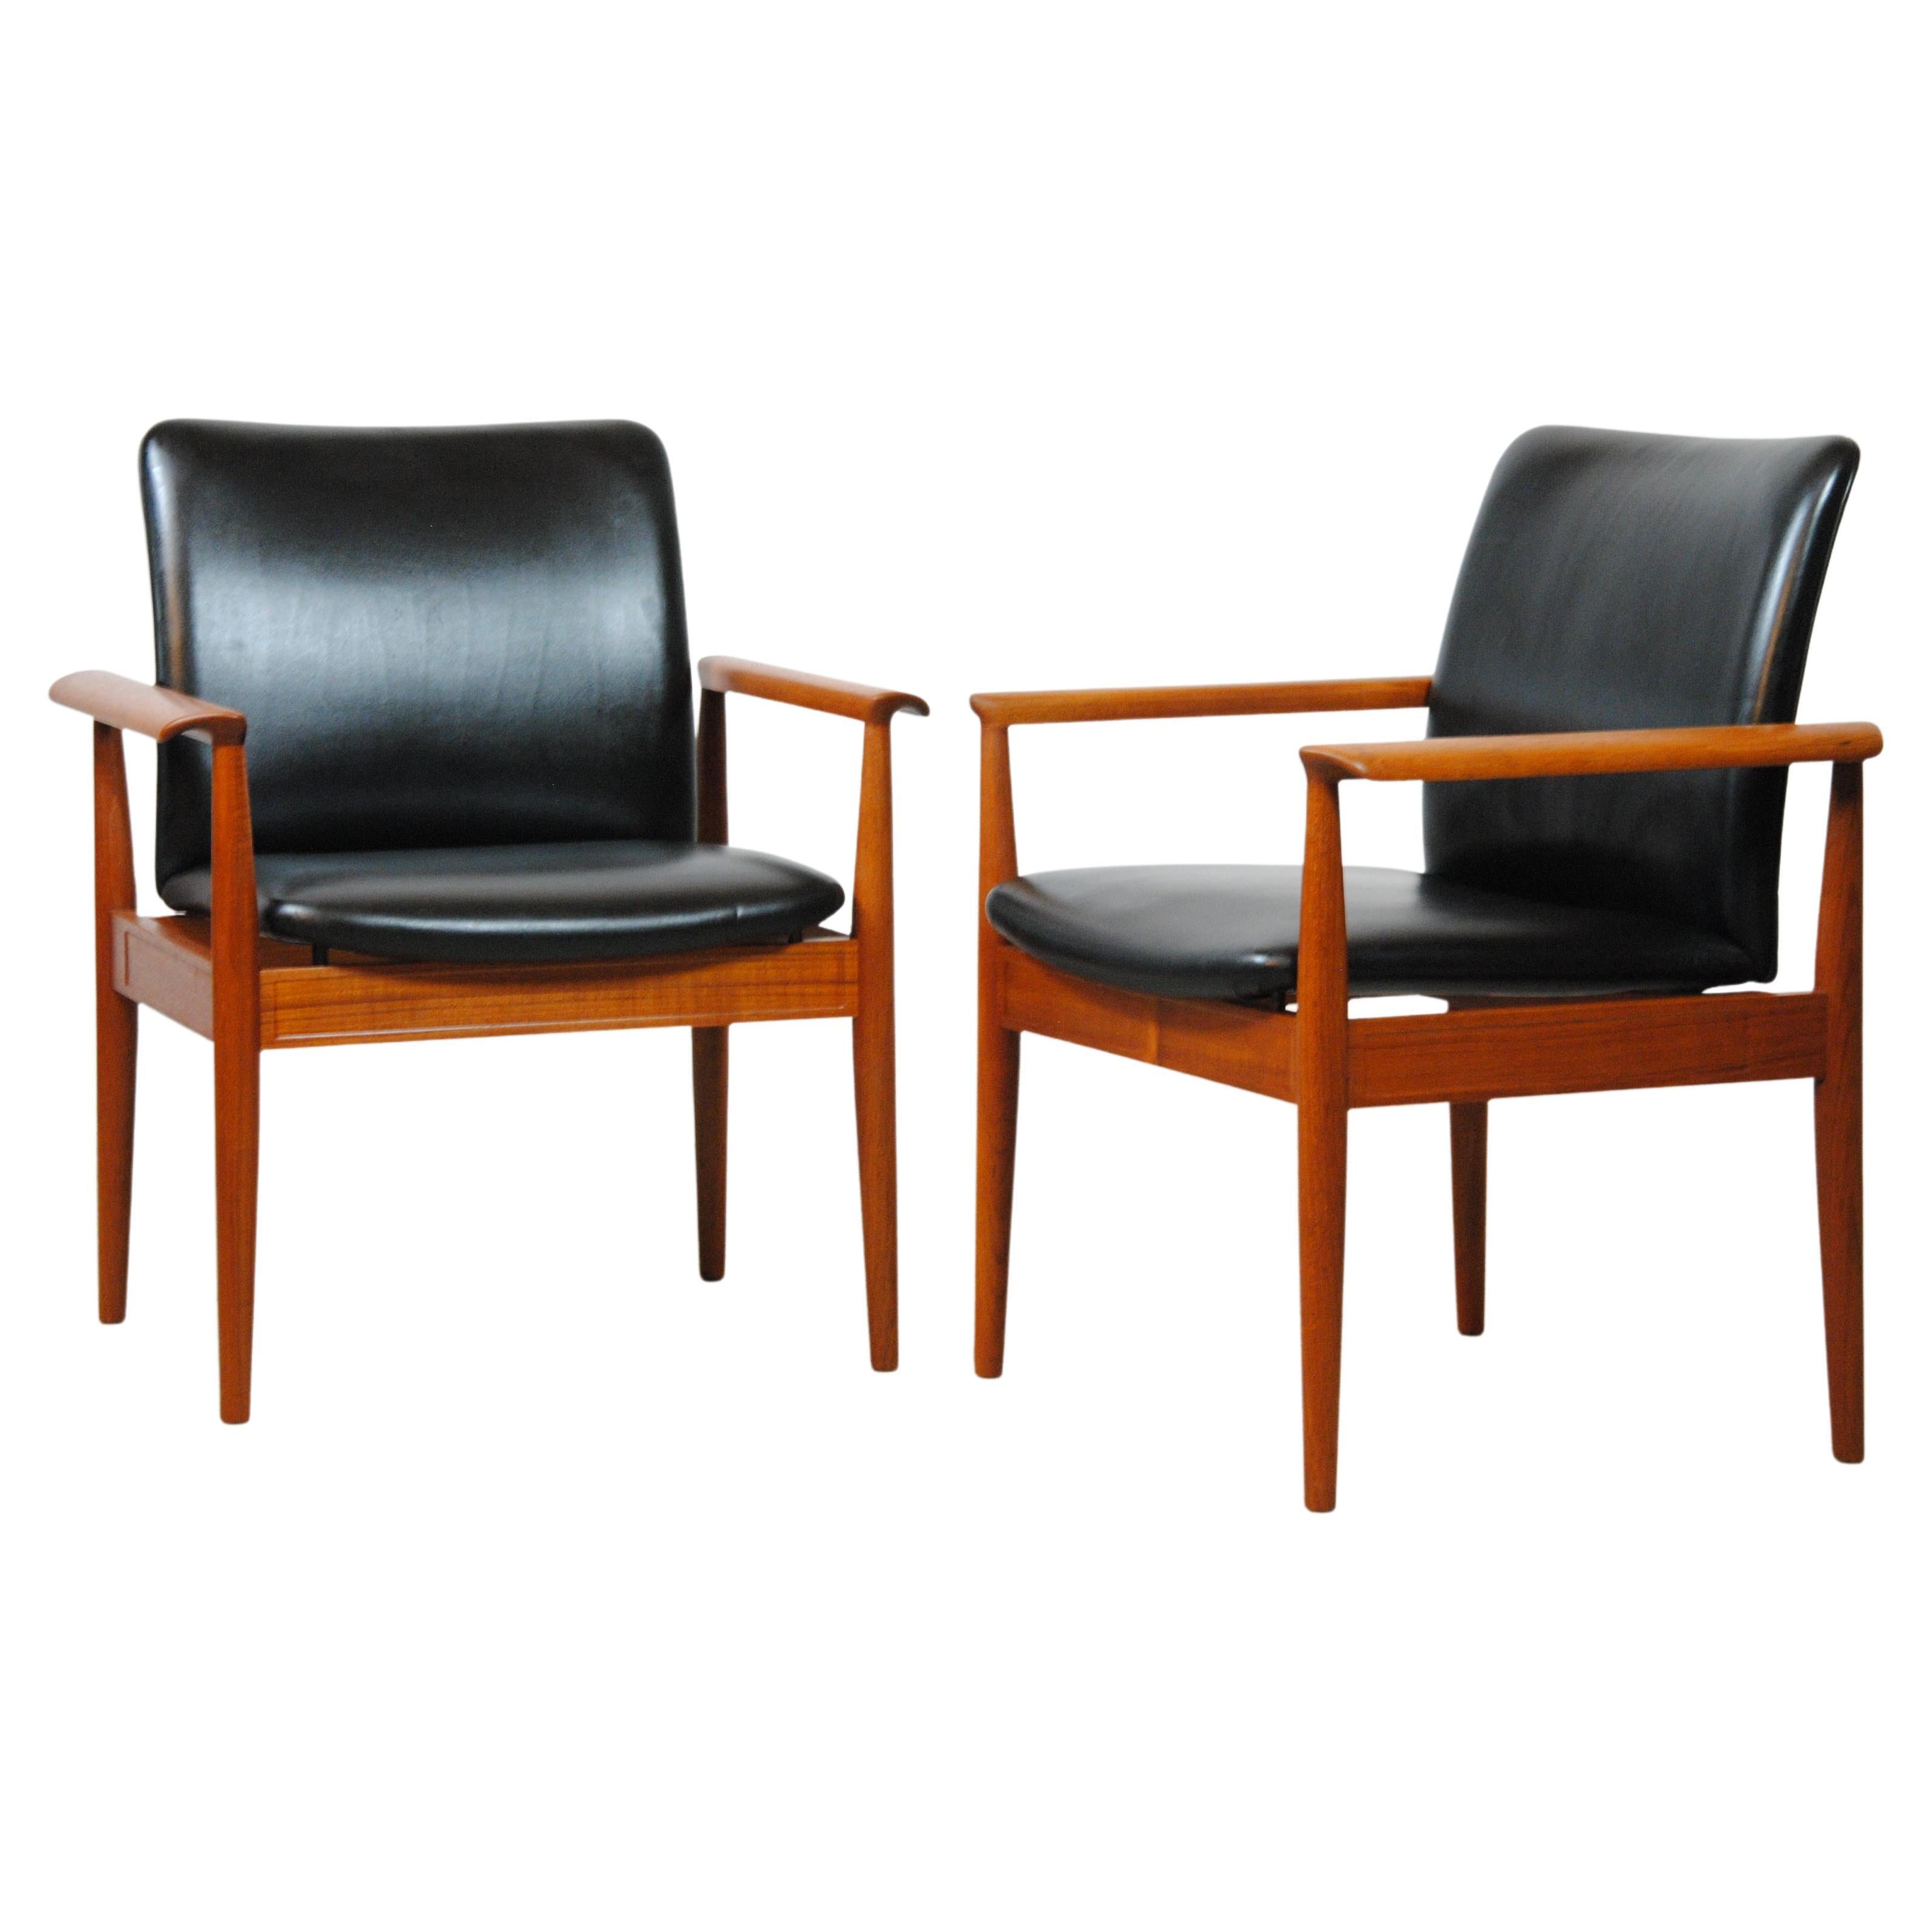 1960s Finn Juhl Set of Two Fully Restored Armchairs in Teak and Leather by Cado For Sale